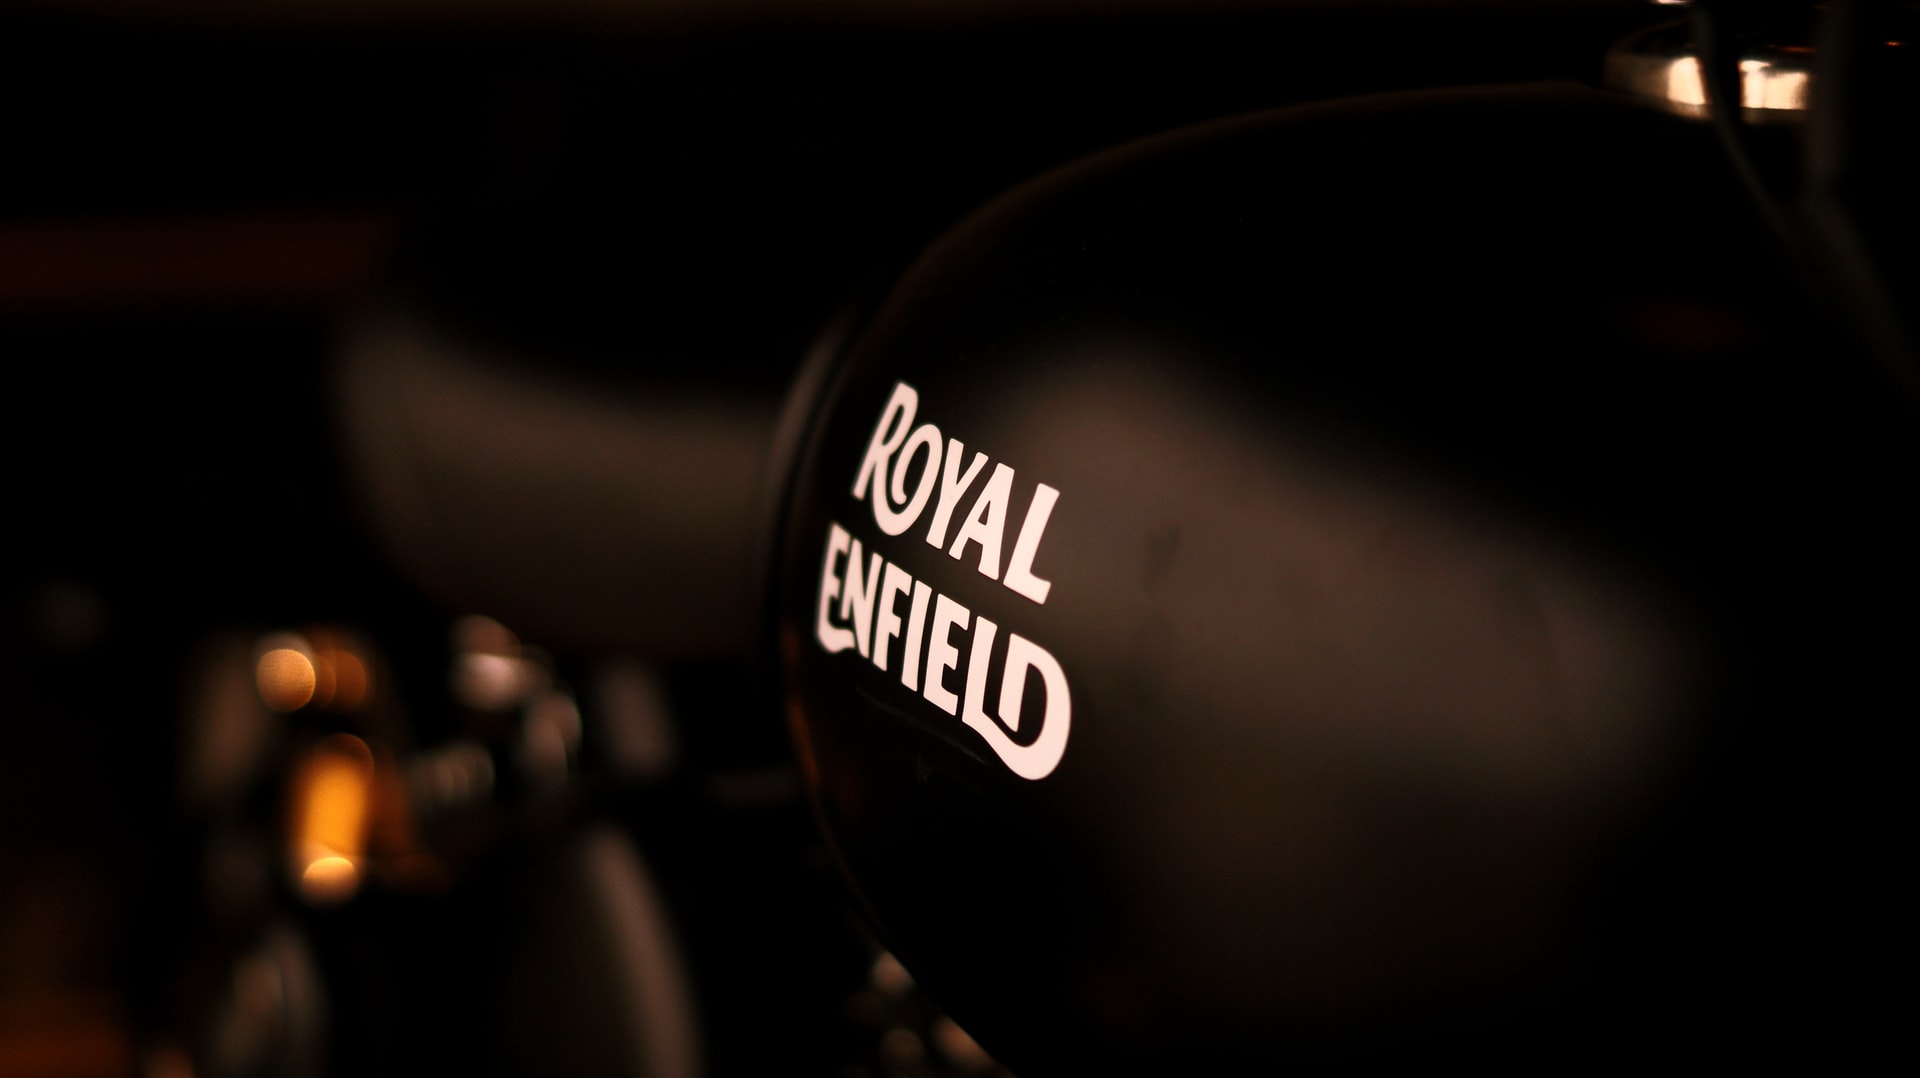 The Royal Enfield Story | Paperflite